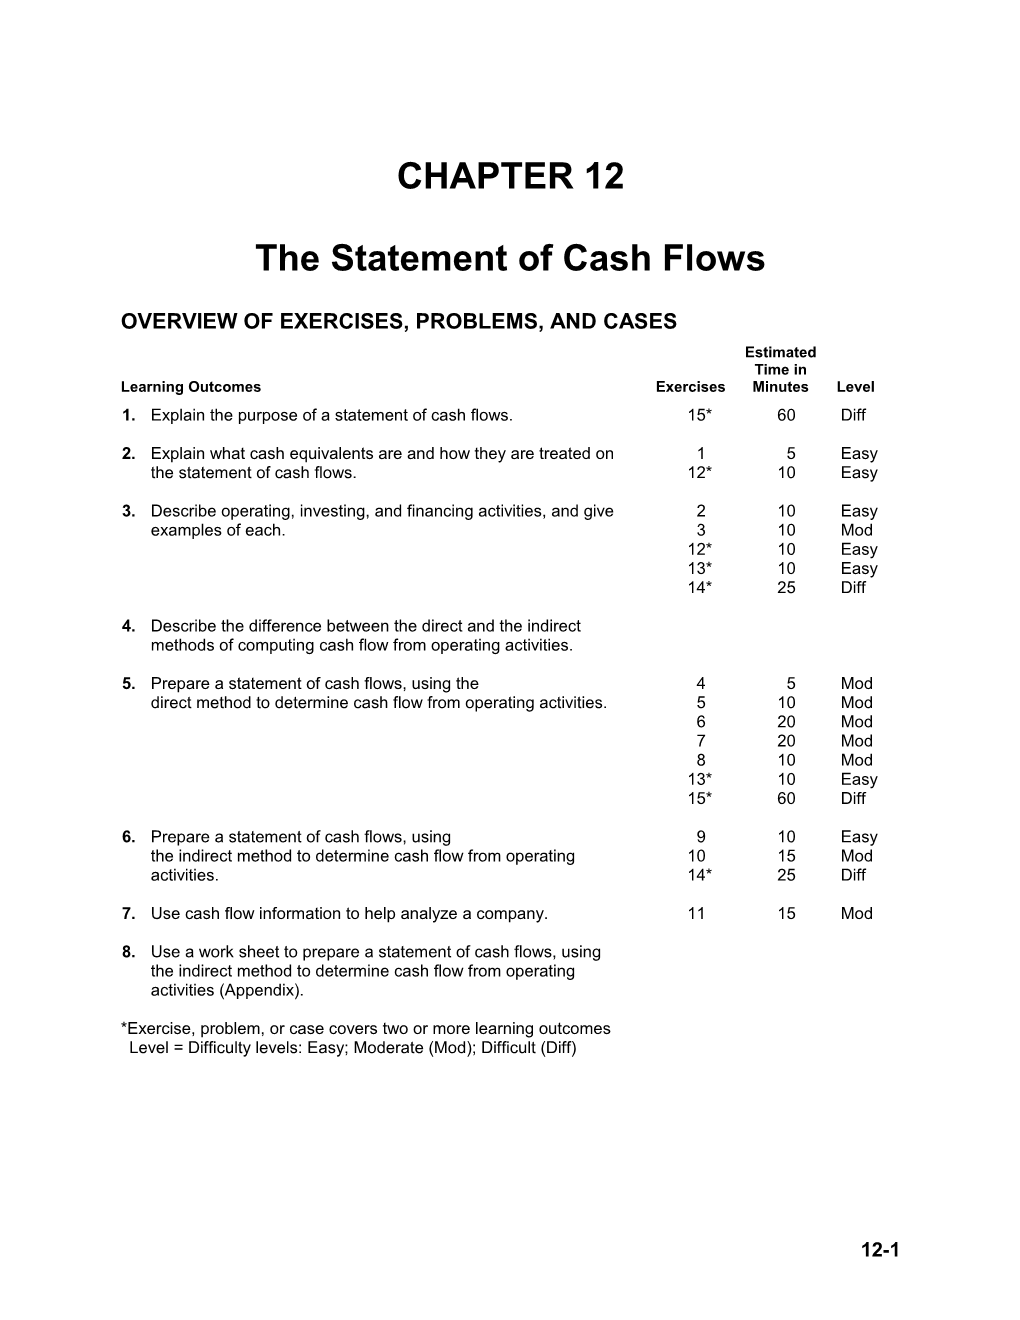 Chapter 12: the Statement of Cash Flows